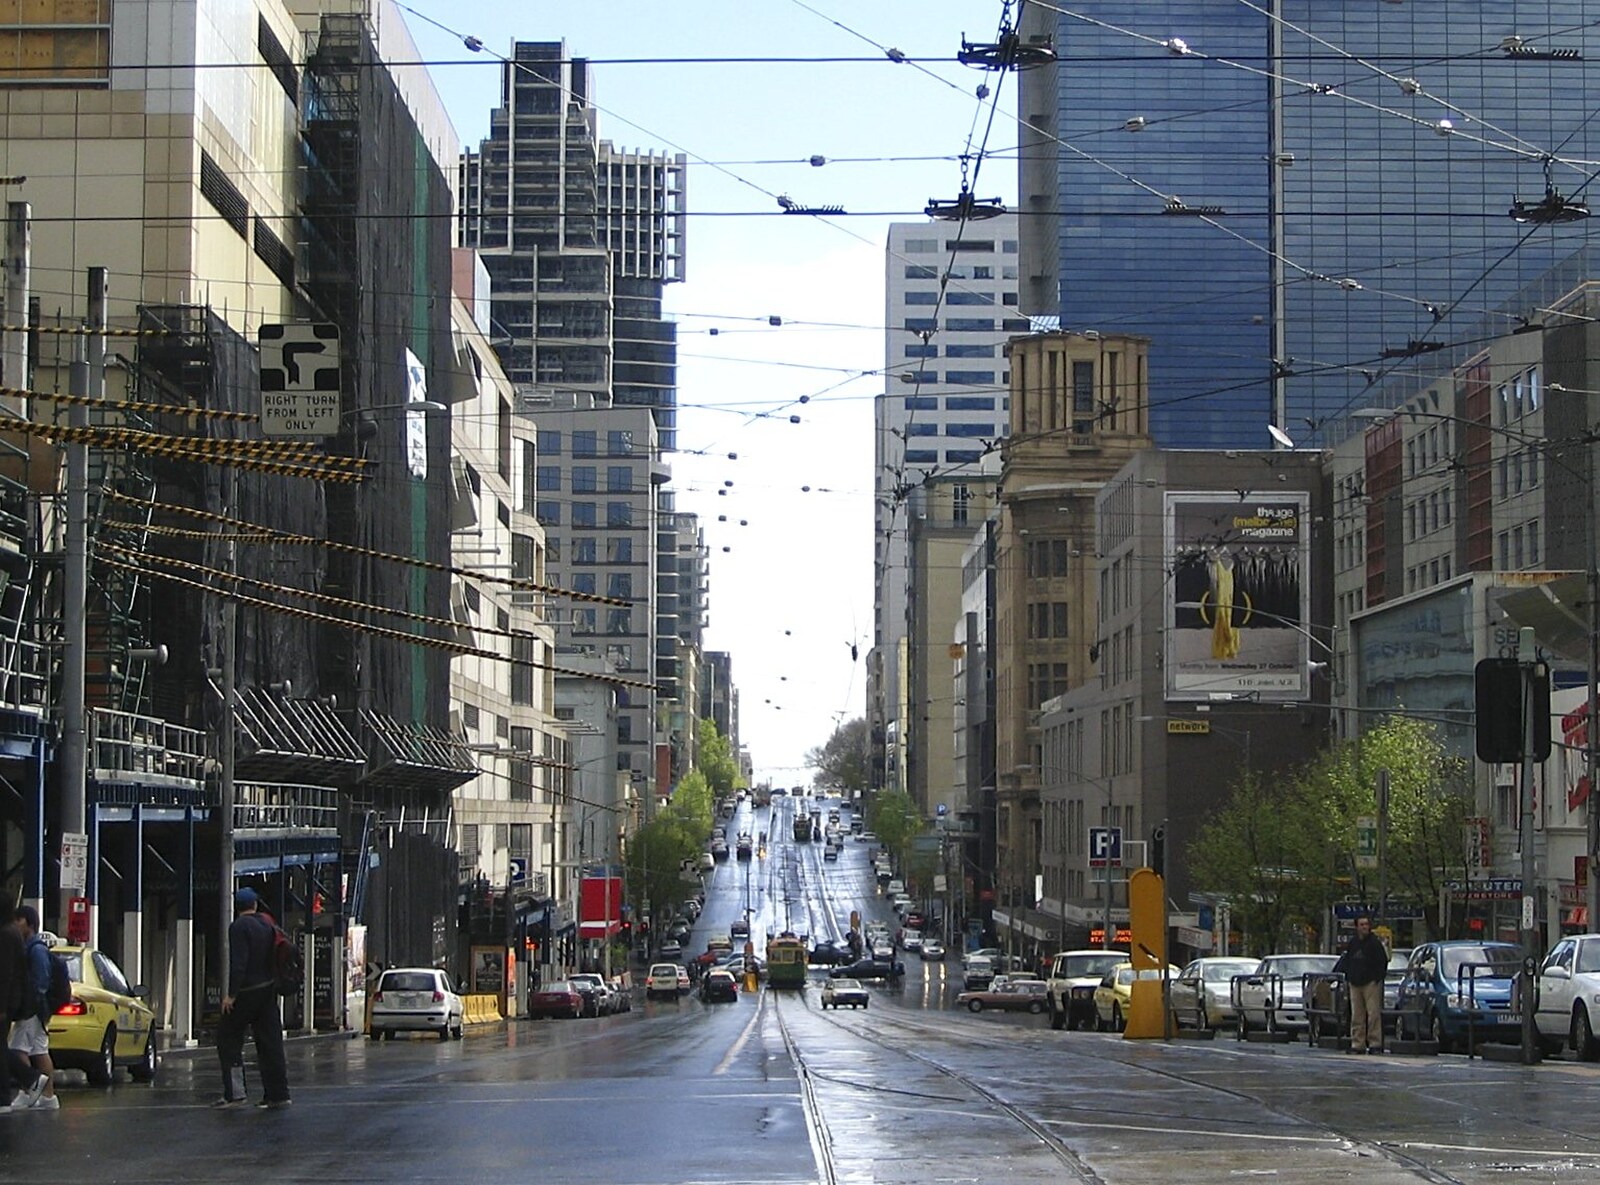 Looking down Flinder's Street from A Couple of Days in Melbourne, Victoria, Australia - 5th October 2004